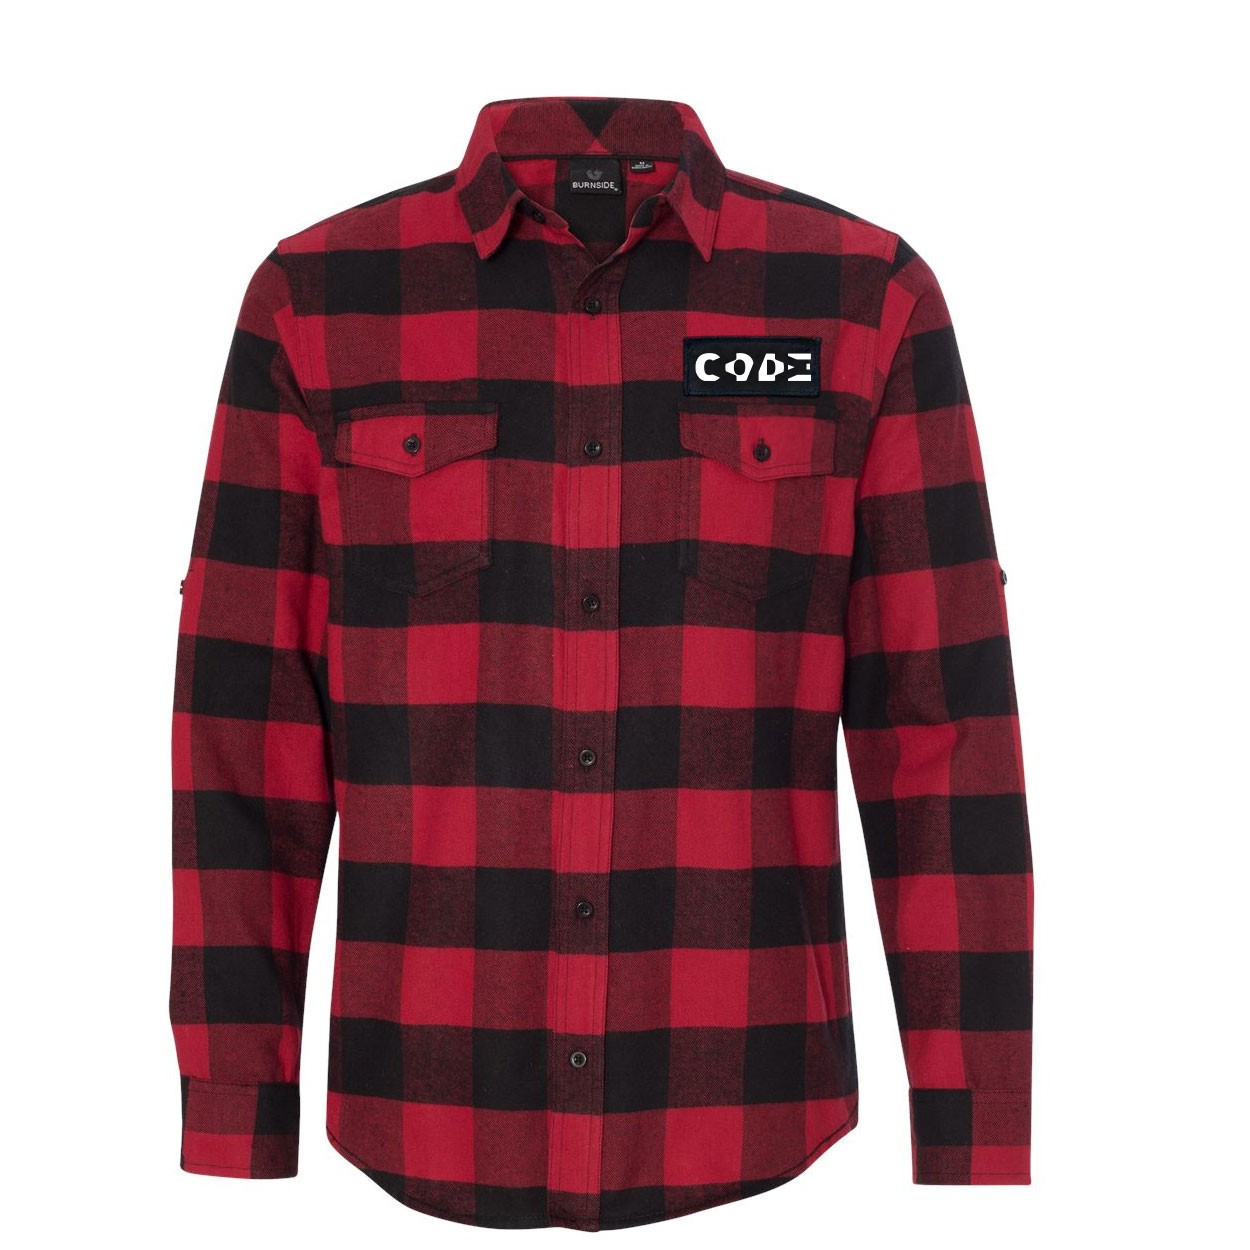 Code Tag Logo Classic Unisex Long Sleeve Woven Patch Flannel Shirt Red/Black Buffalo (White Logo)